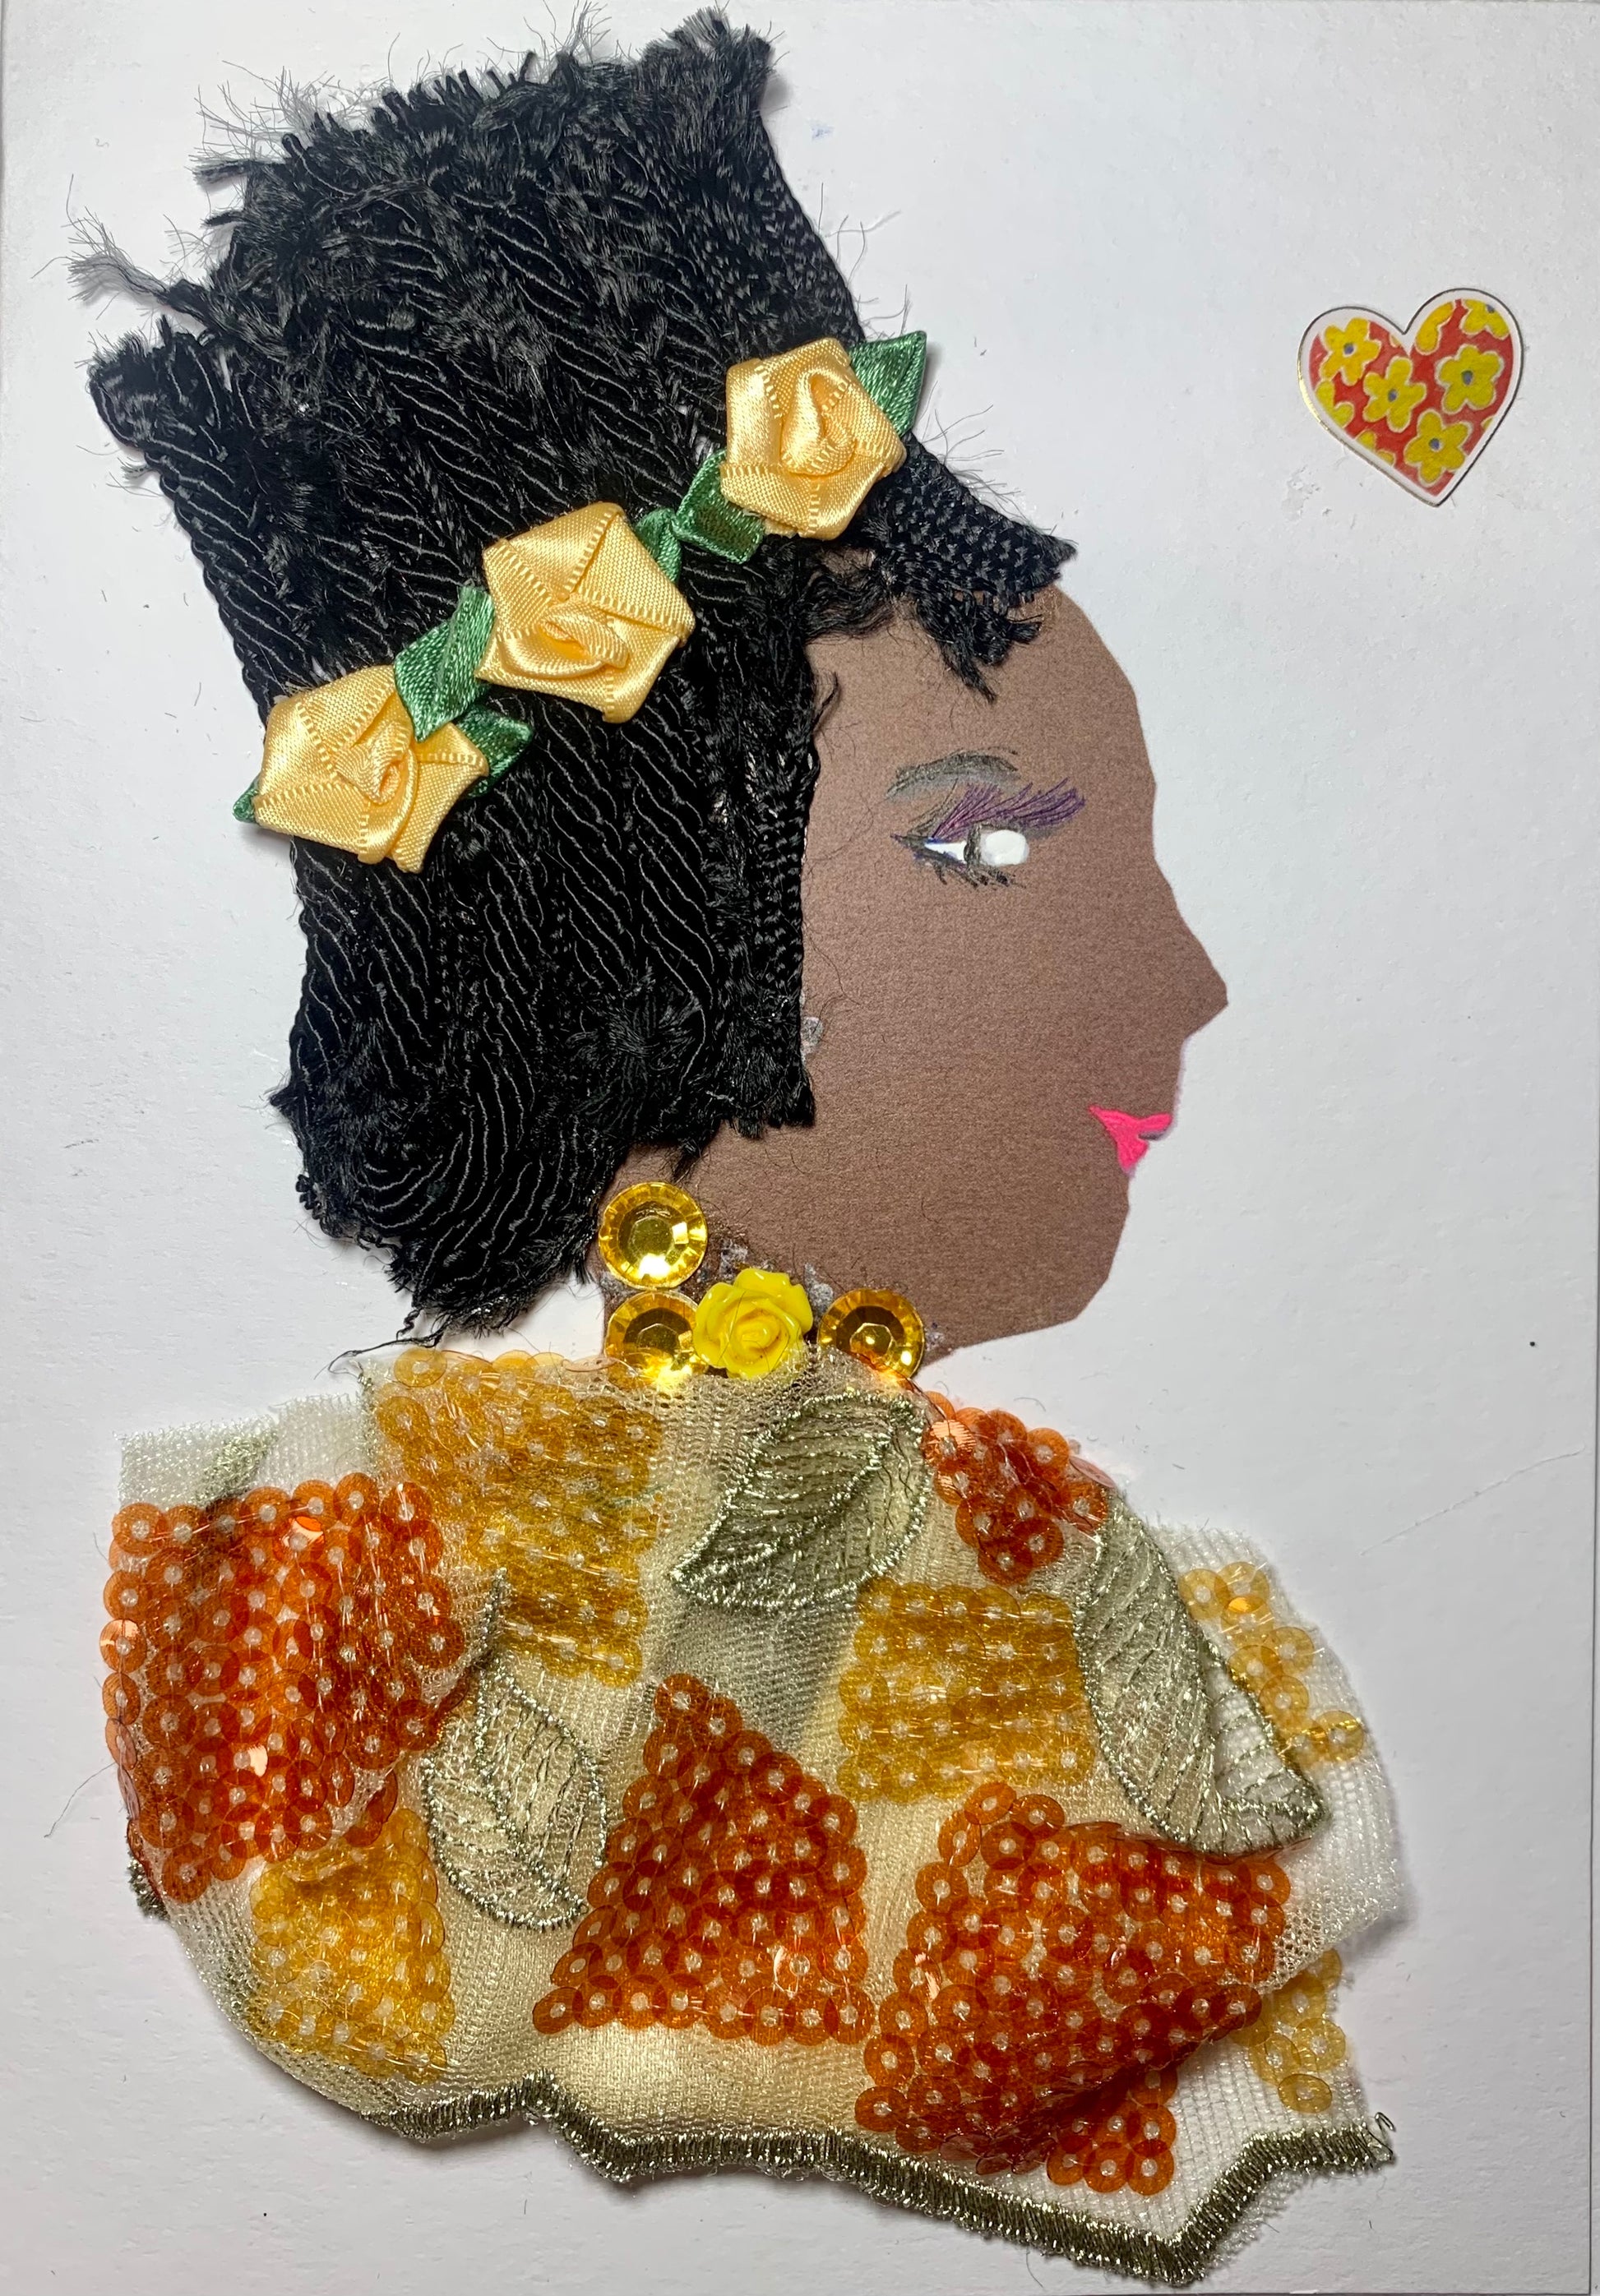 This card is called Ibadan pie, and she is wearing an orange sequined blouse with matching orange roses in her black braided hair. 